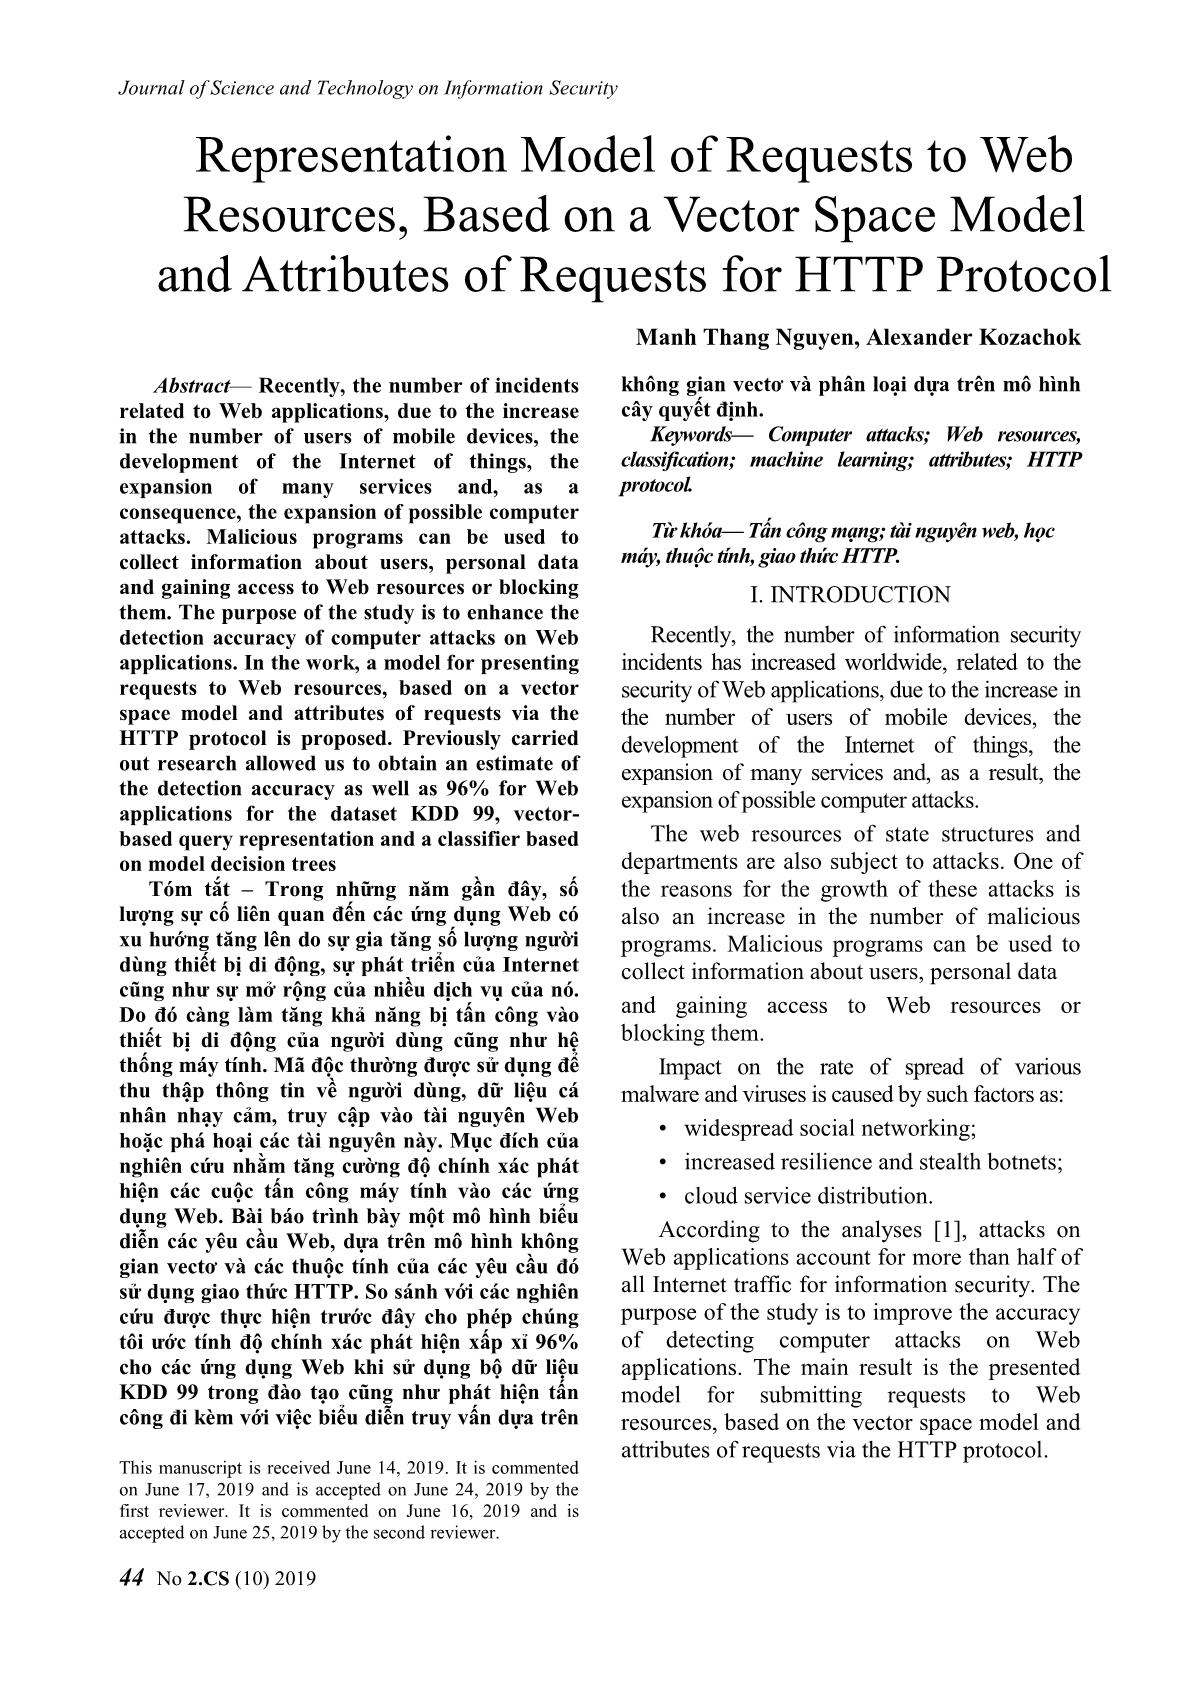 Representation Model of Requests to Web Resources, Based on a Vector Space Model and Attributes of Requests for HTTP Protocol trang 1